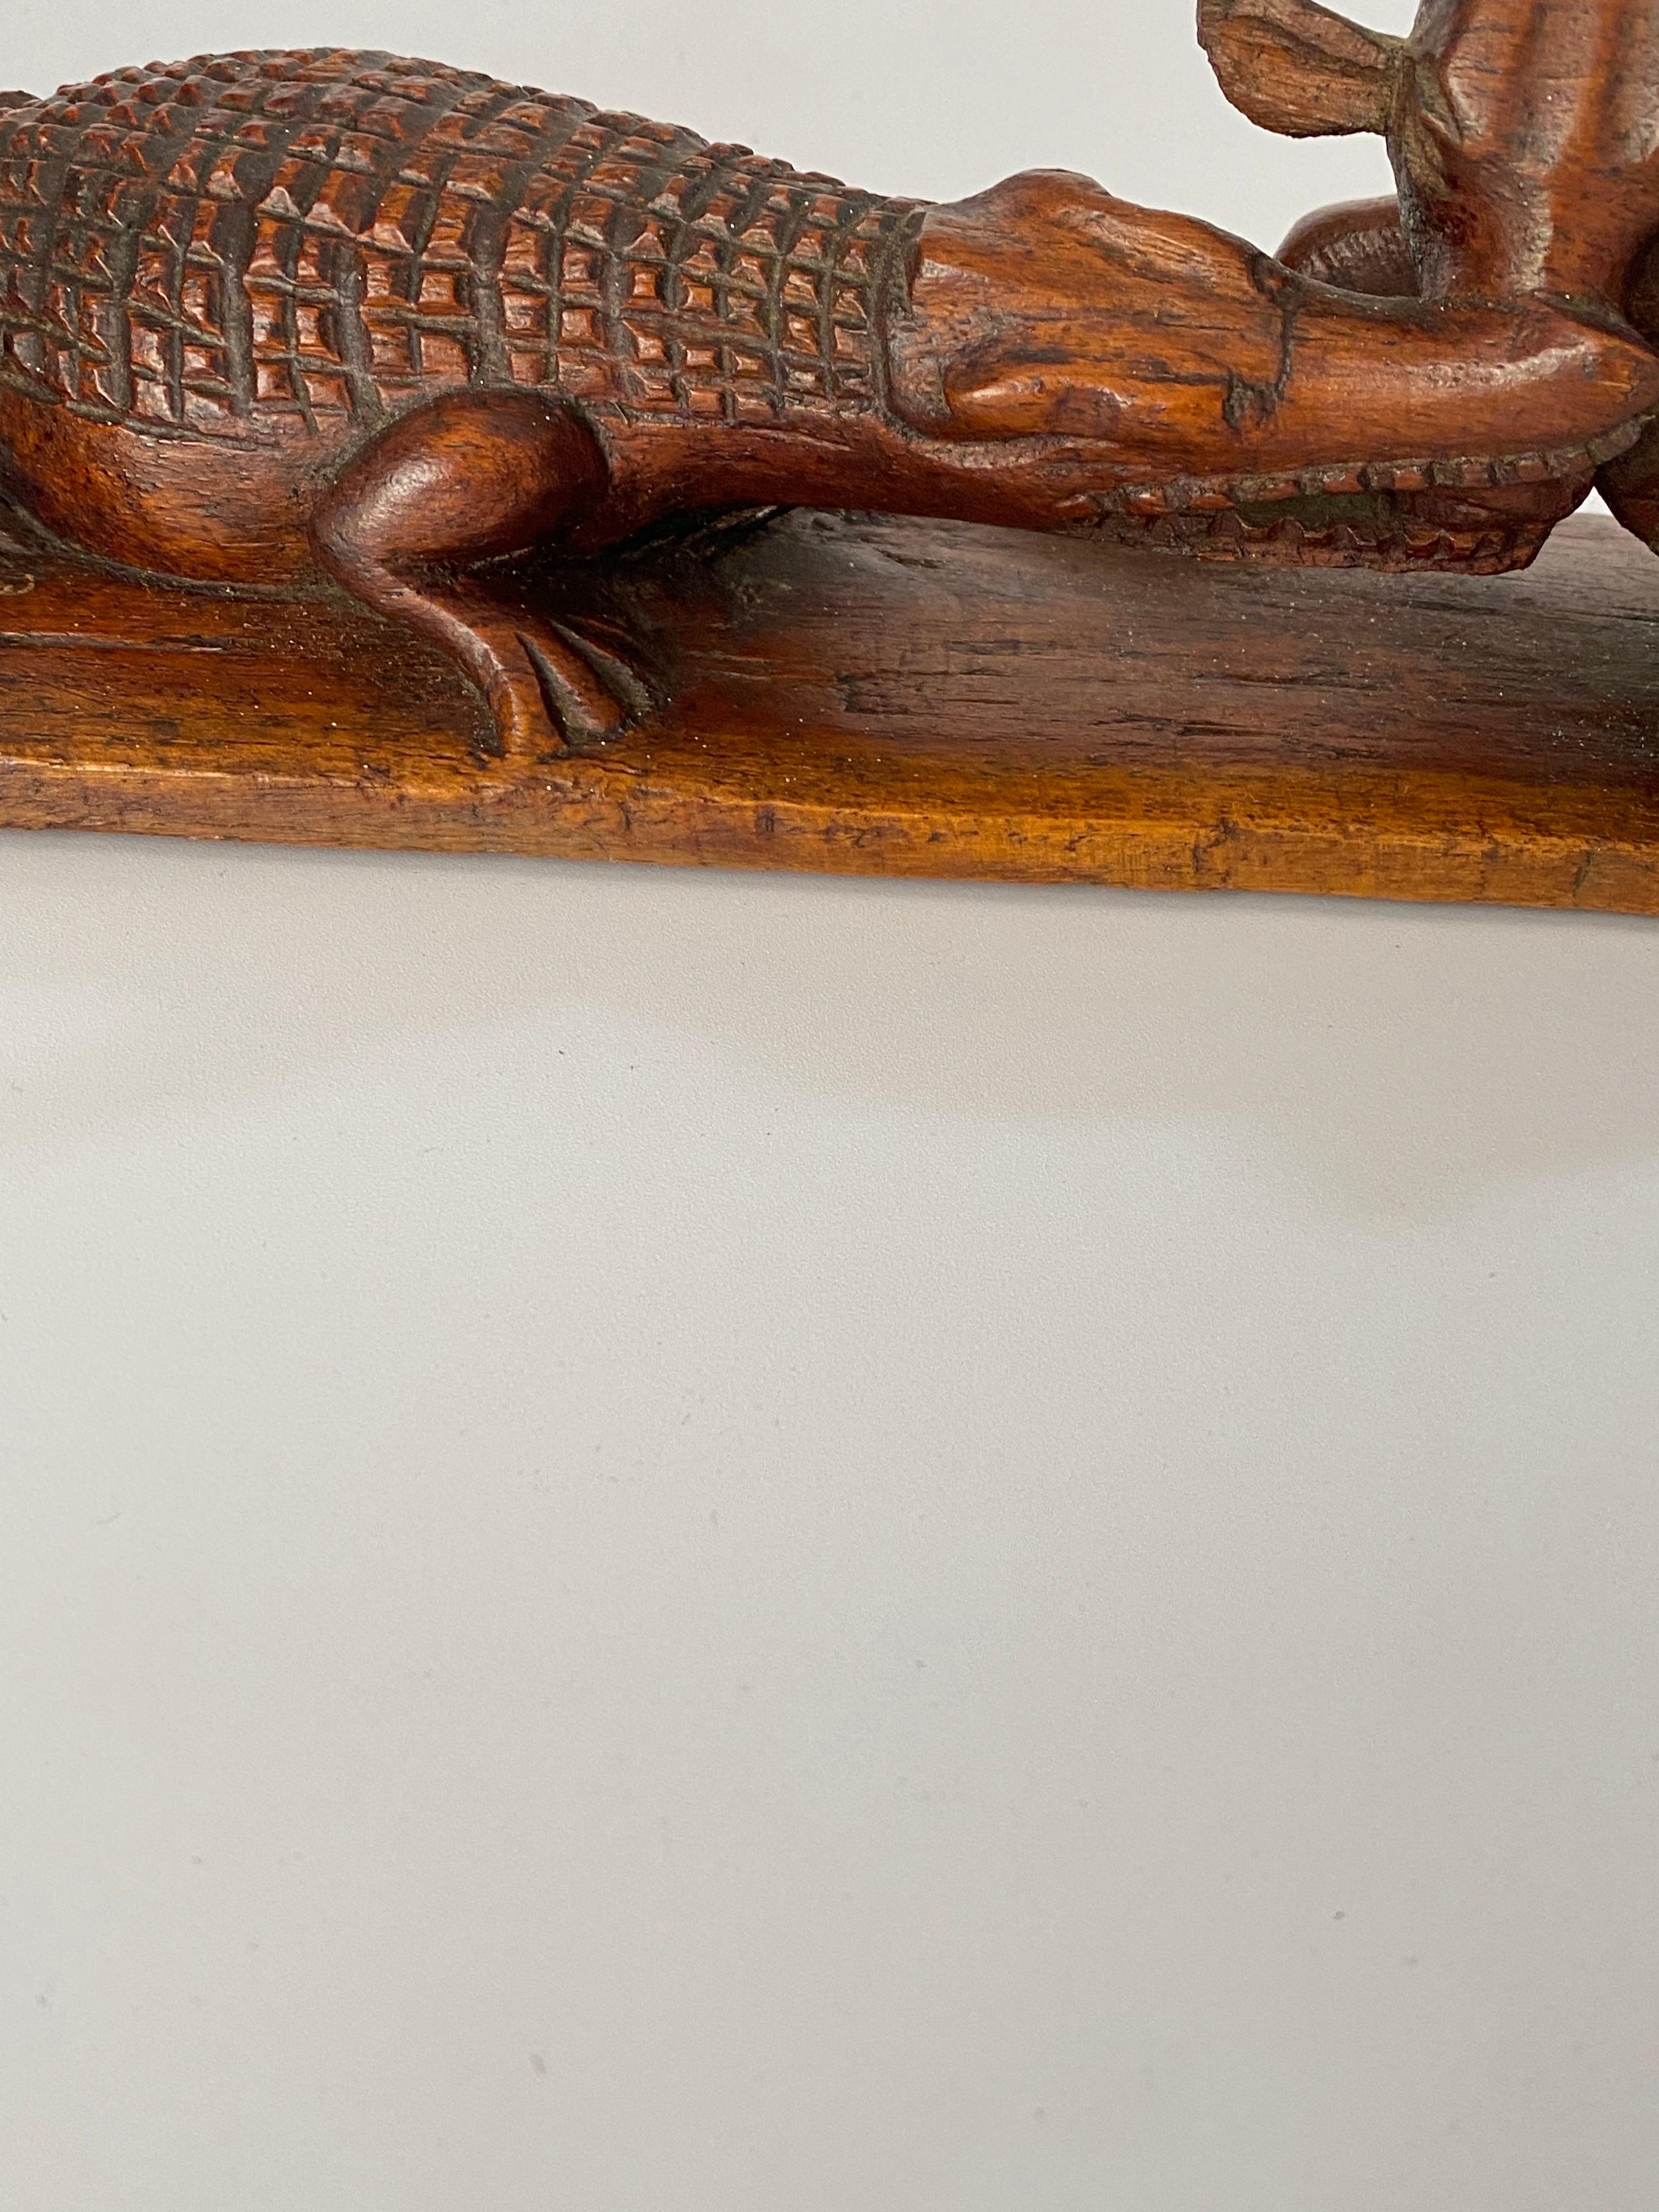 Mid-20th Century Wood Sculpture Representing a Crocodile and a Bull Fighting, in Wood France 1930 For Sale